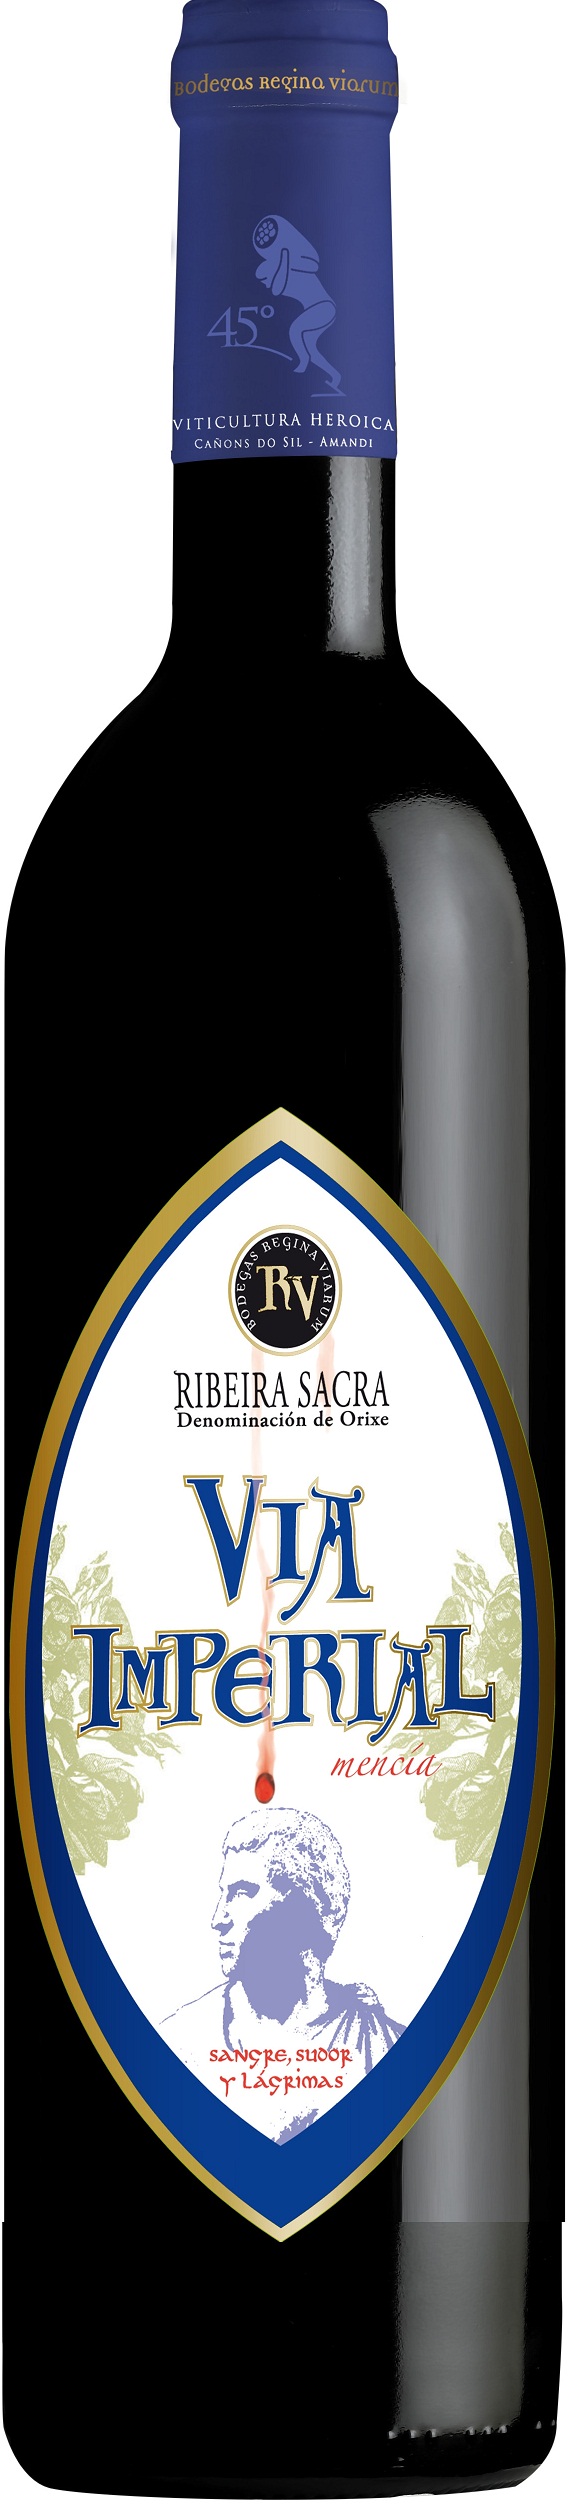 Image of Wine bottle Vía Imperial